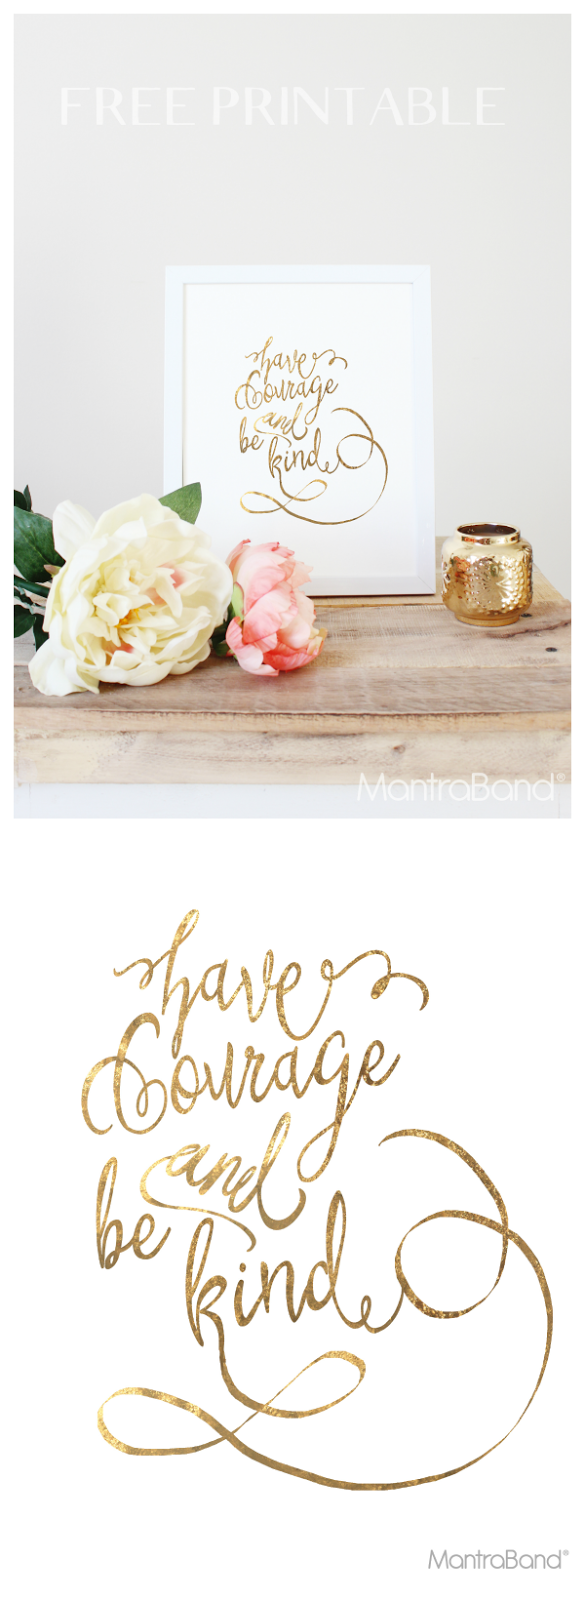 "Have Courage and Be Kind" Free Printable + 9 more free printable wall art pieces that you won't believe are free!